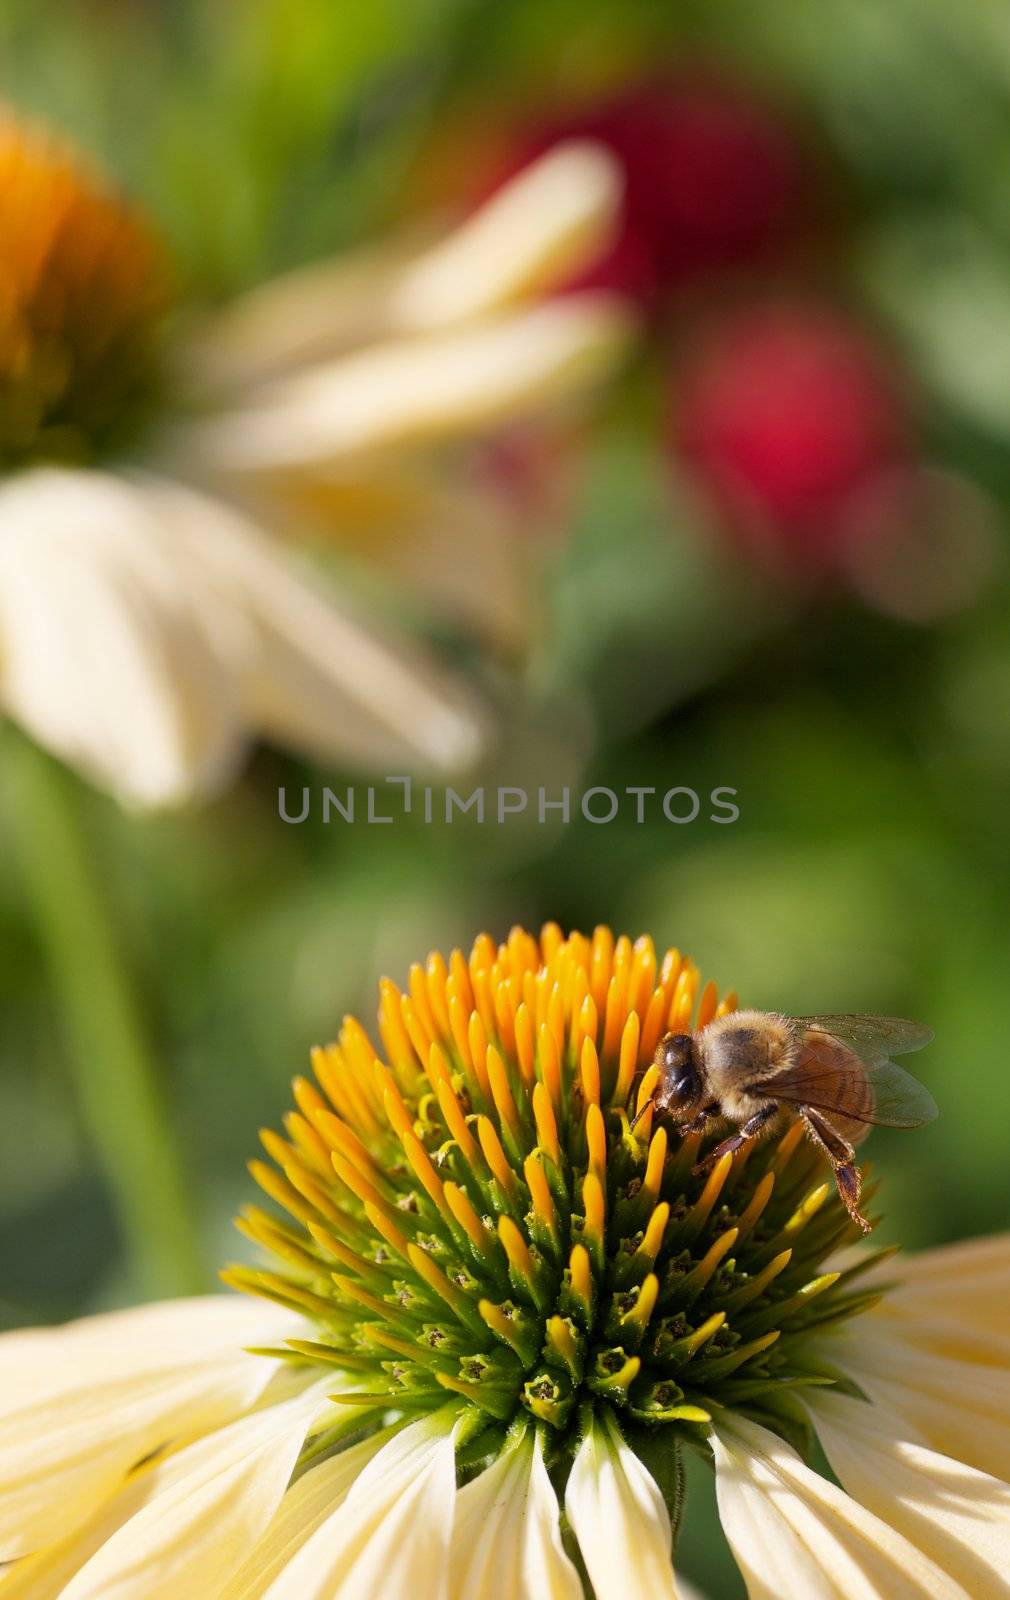 Gold bee working orange and green pistil and stamens of a yellow echinacea flower